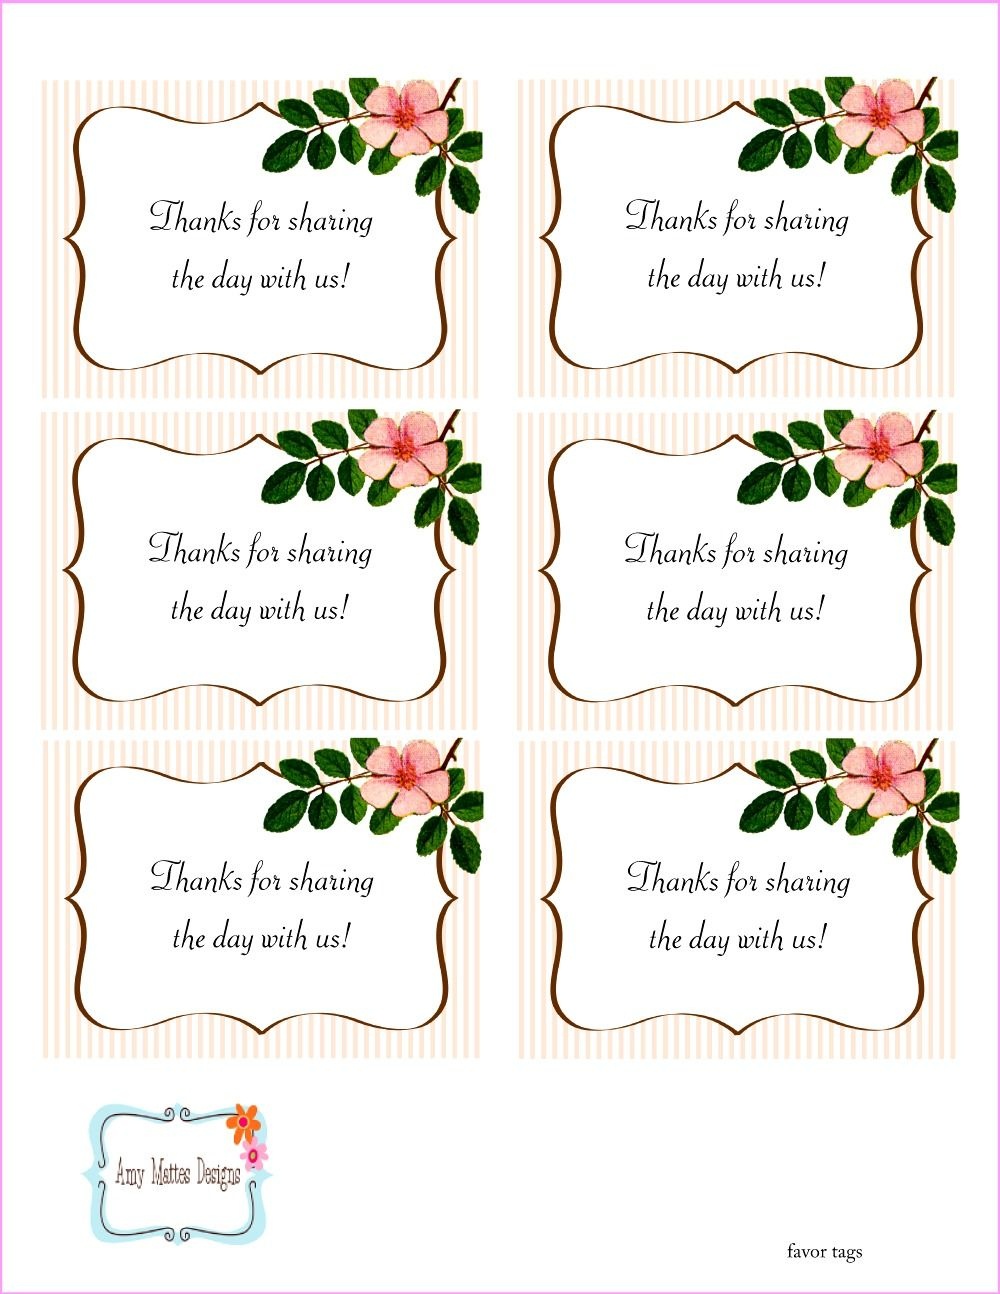 The Beautiful Wedding Favor Tags As Our Identity: Free Printable - Free Printable Wedding Favor Tags